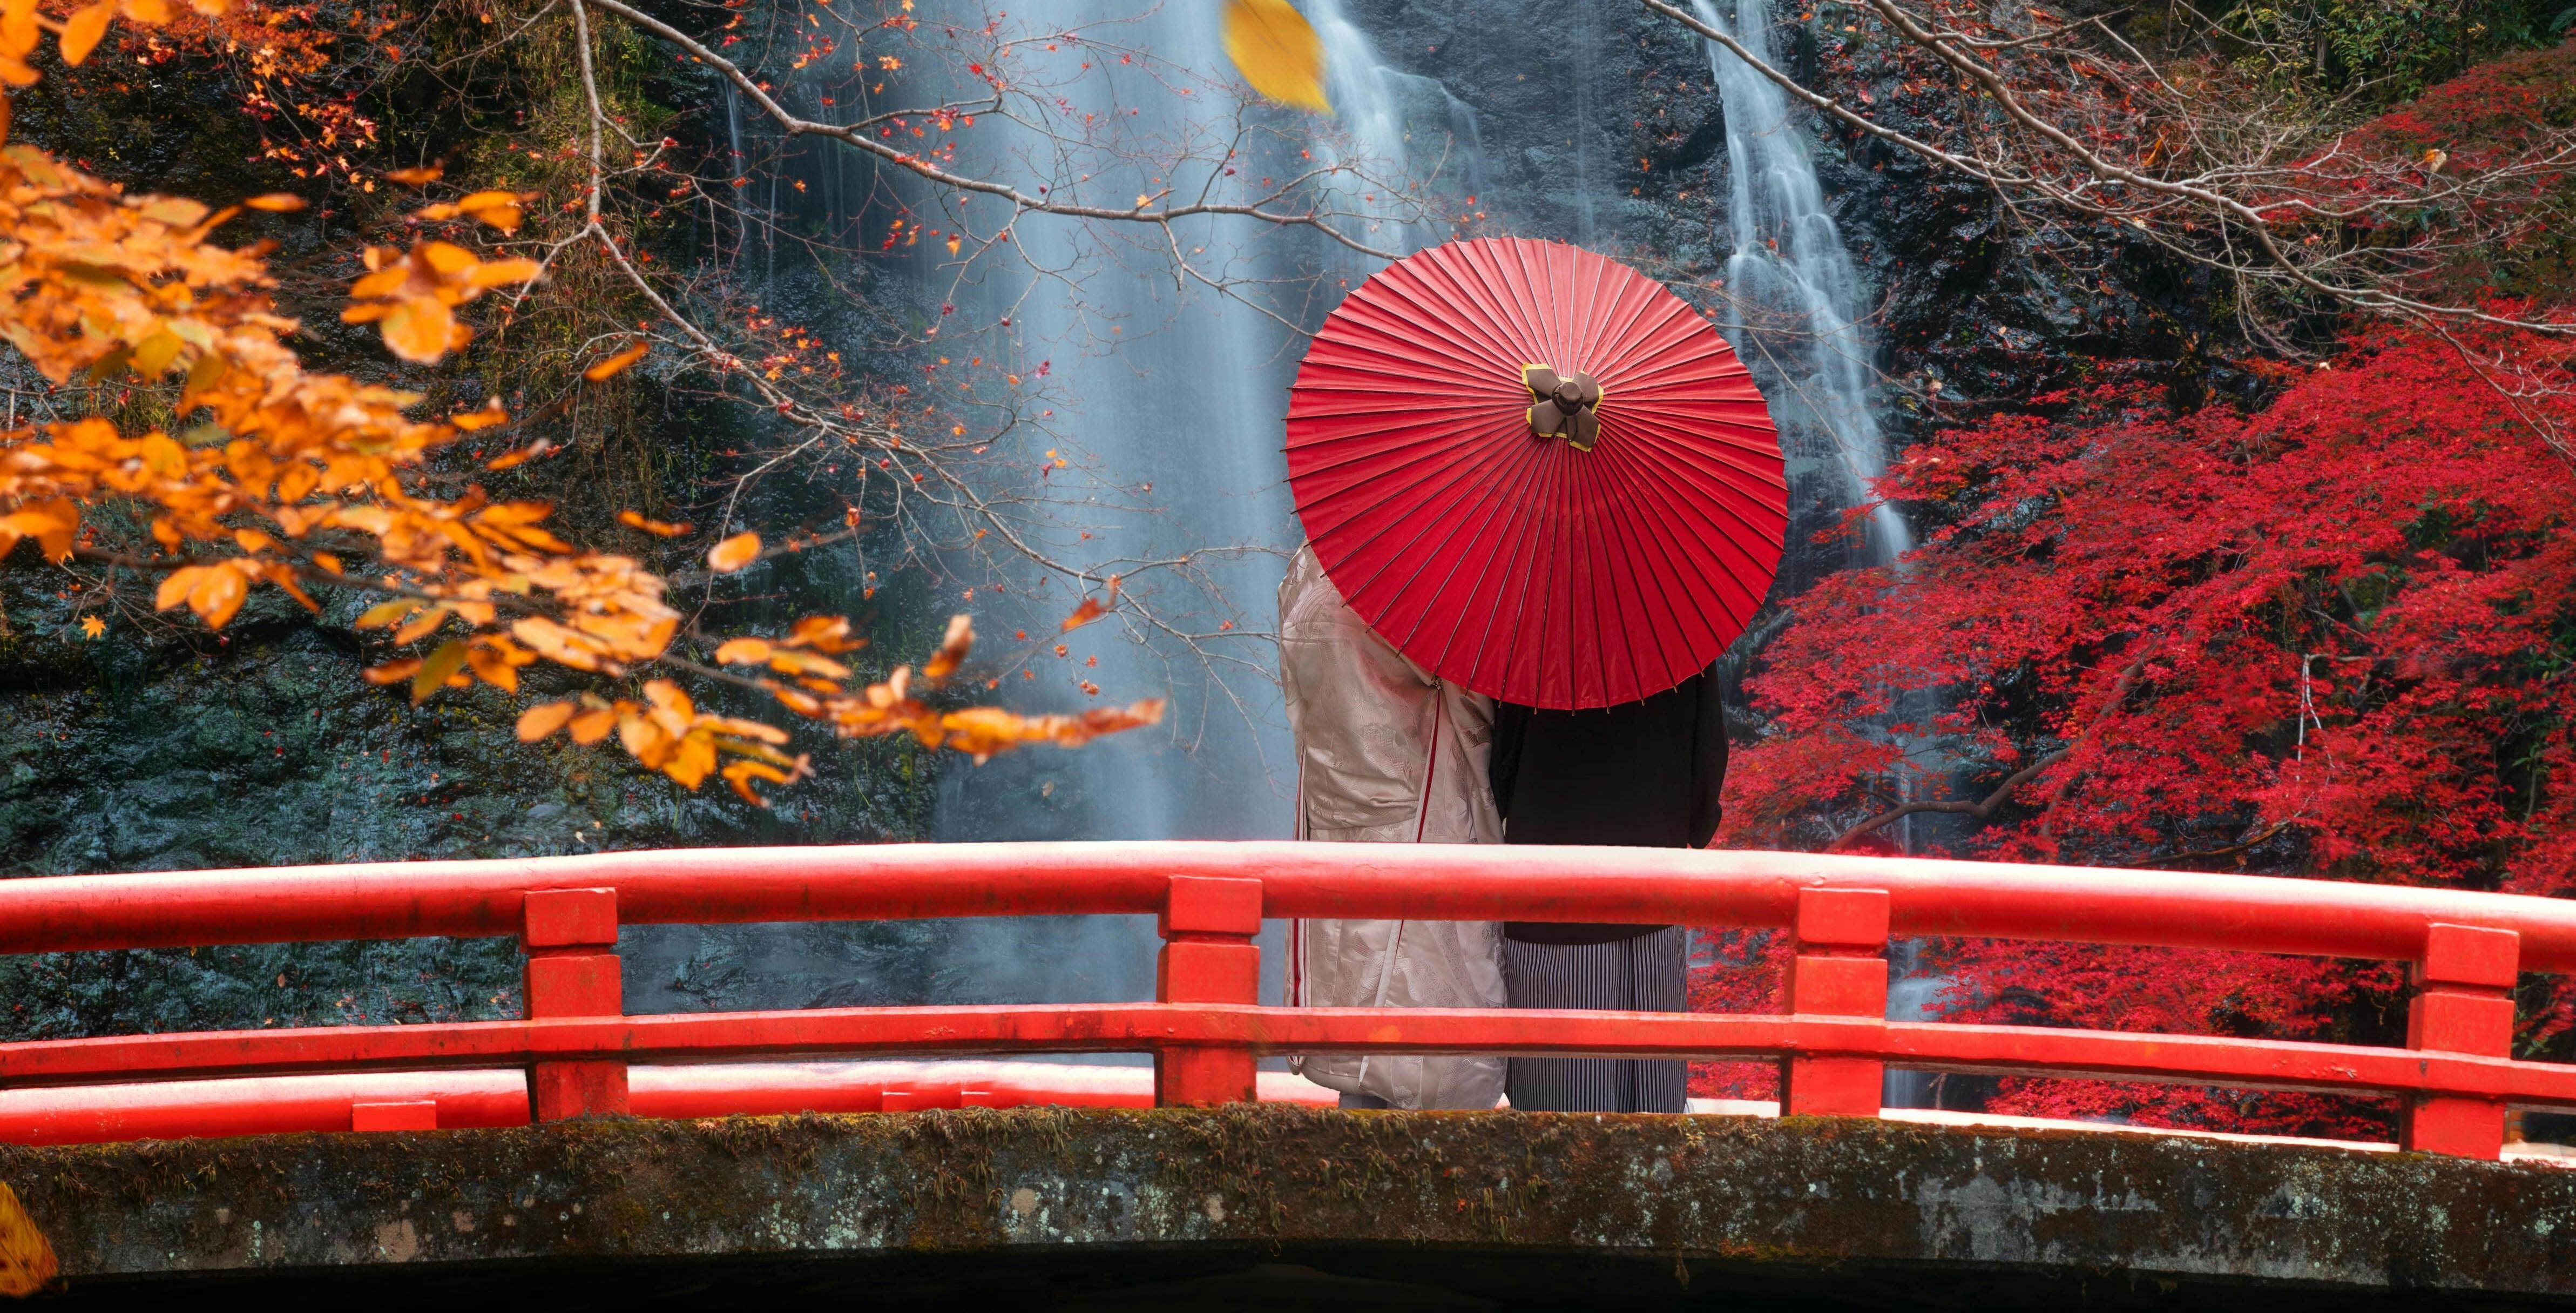 A couple dressed in traditional japanese clothing stand on a red bridge looking at a waterfall